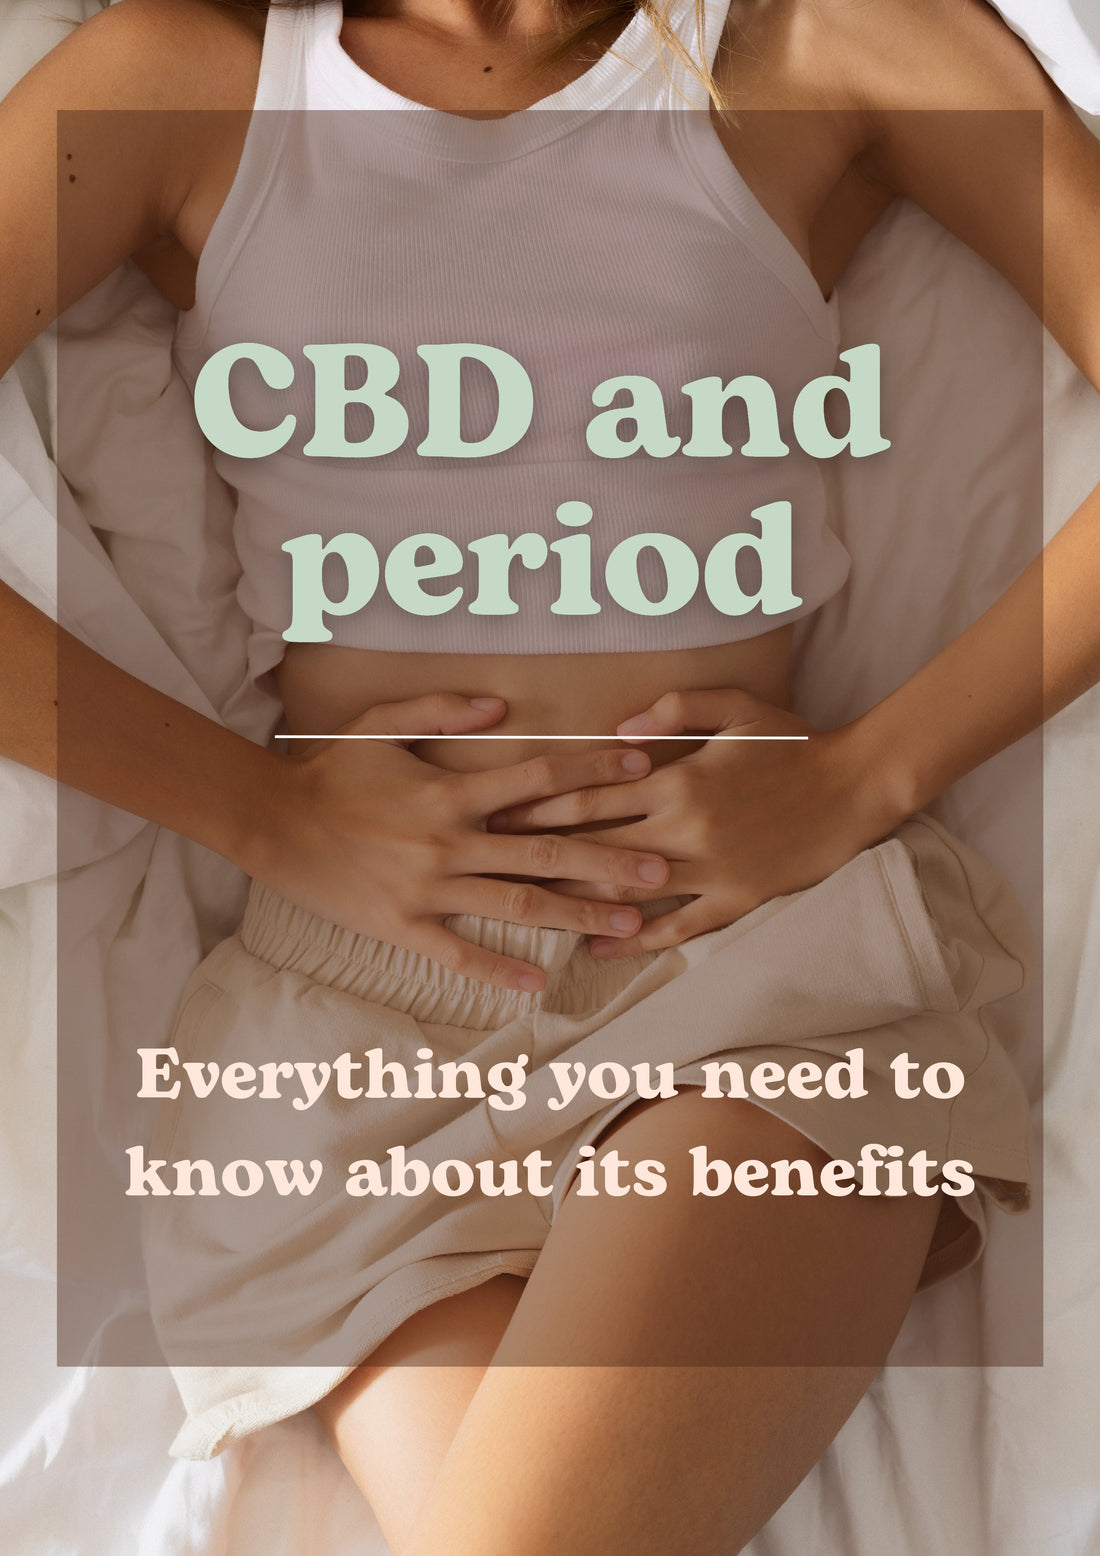 How does CBD helps with menstruation and period Cramps